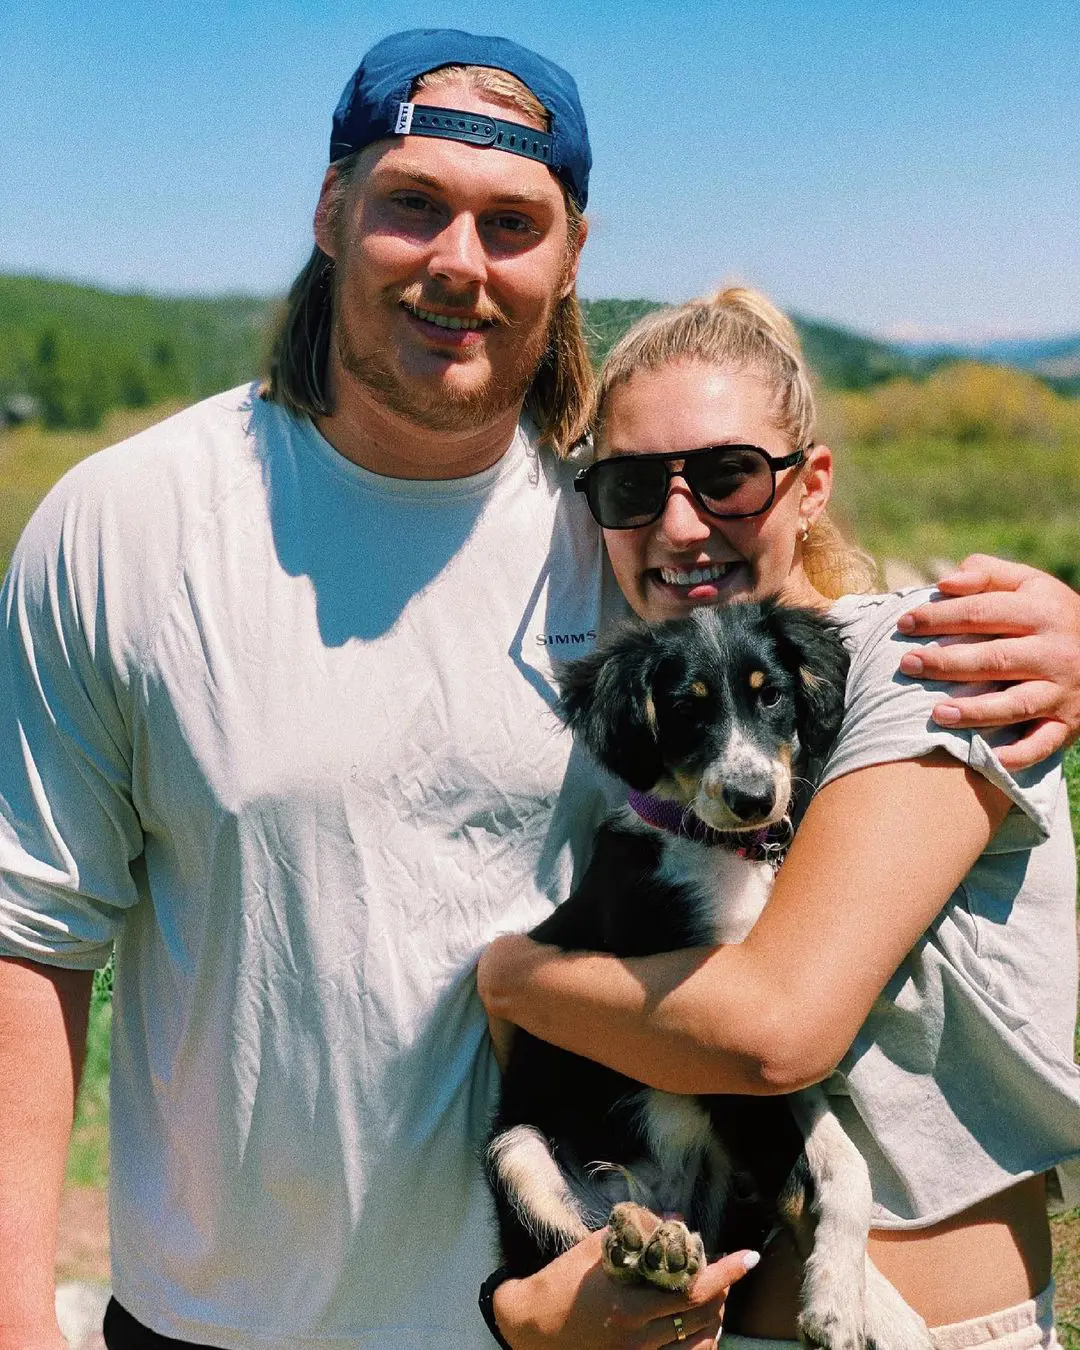 Madi Kubik and Brant Banks spent the weekend in Breckenridge, Colorado, with their adorable dog.